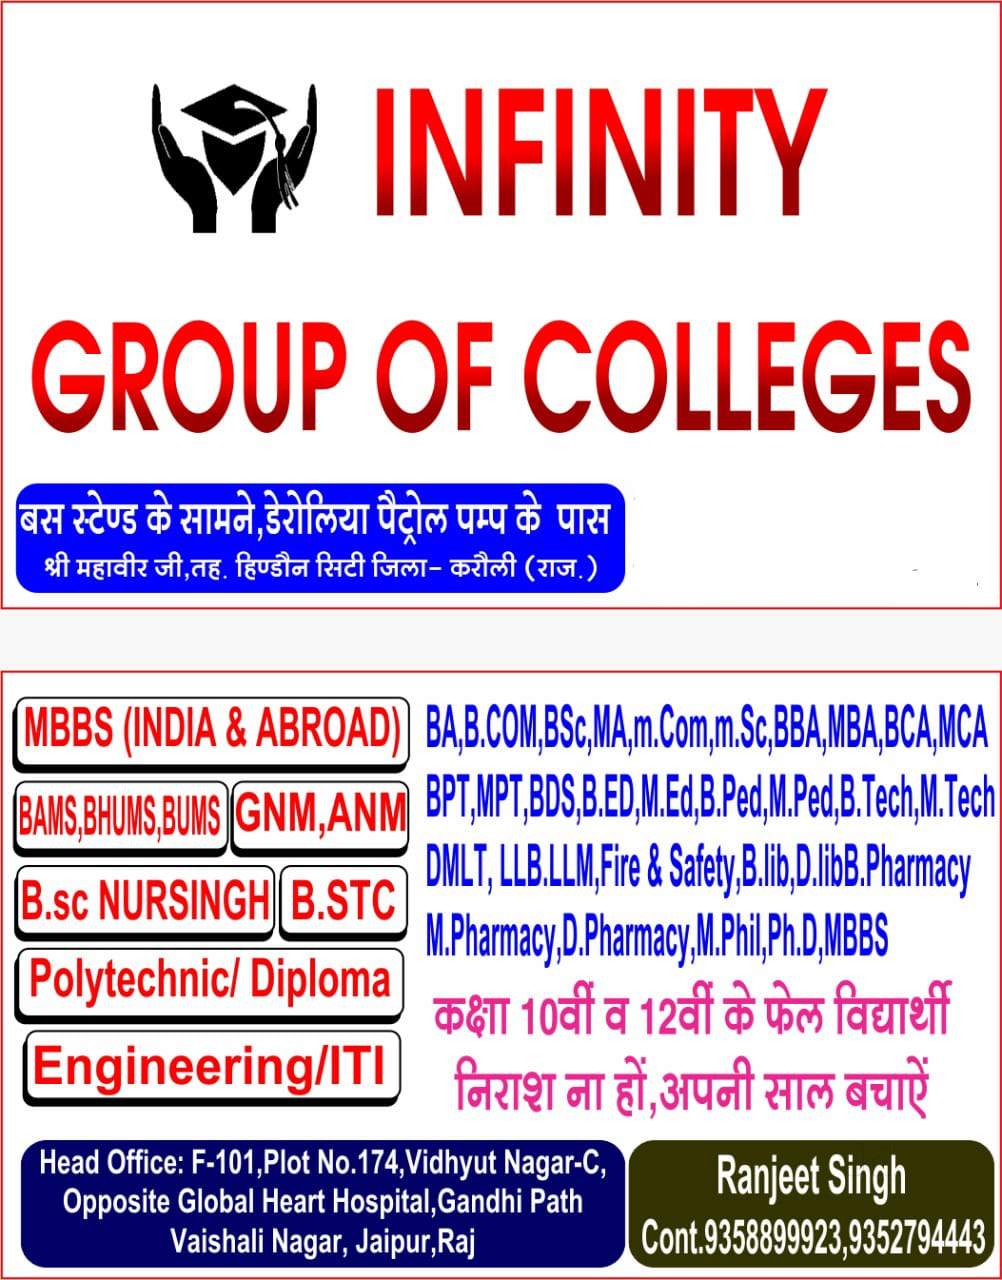 Dazzlerr Institute: Infinity Group Of Colleges & Institutions